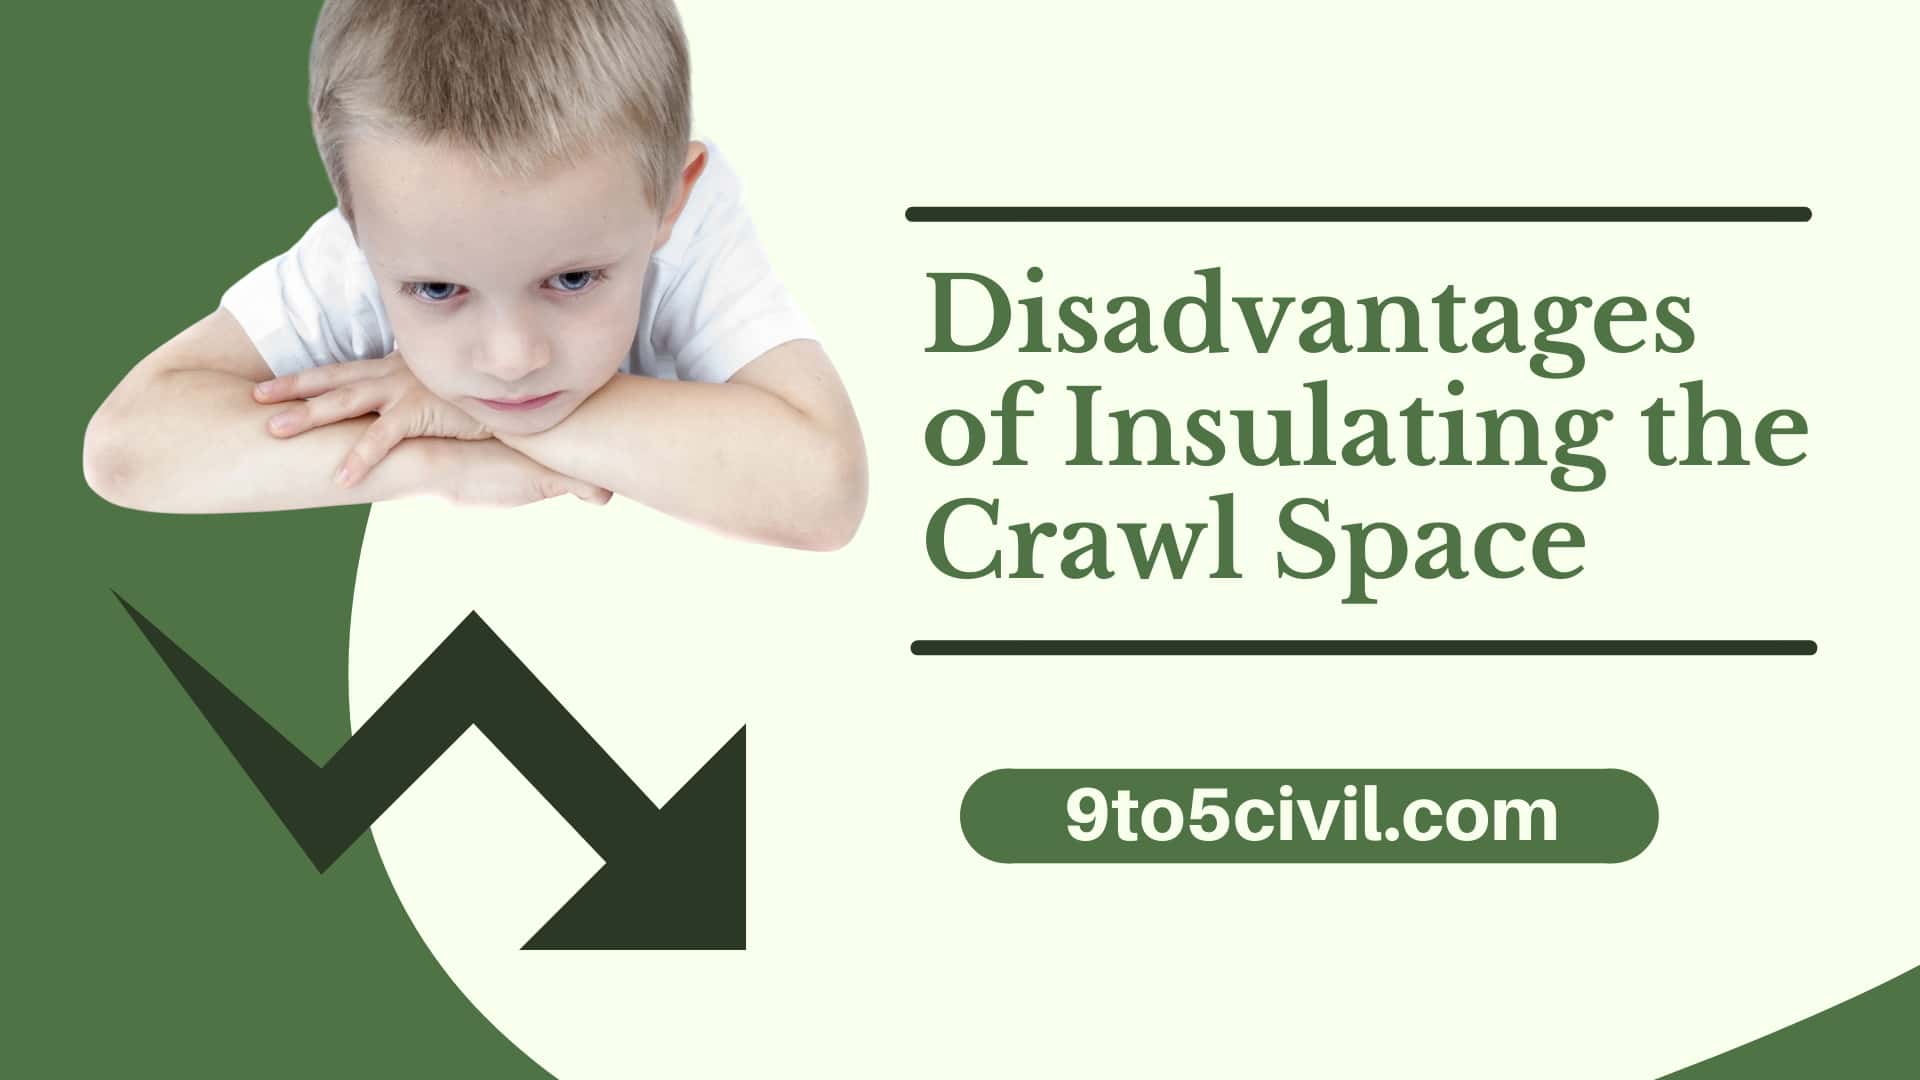 Disadvantages of Insulating the Crawl Space